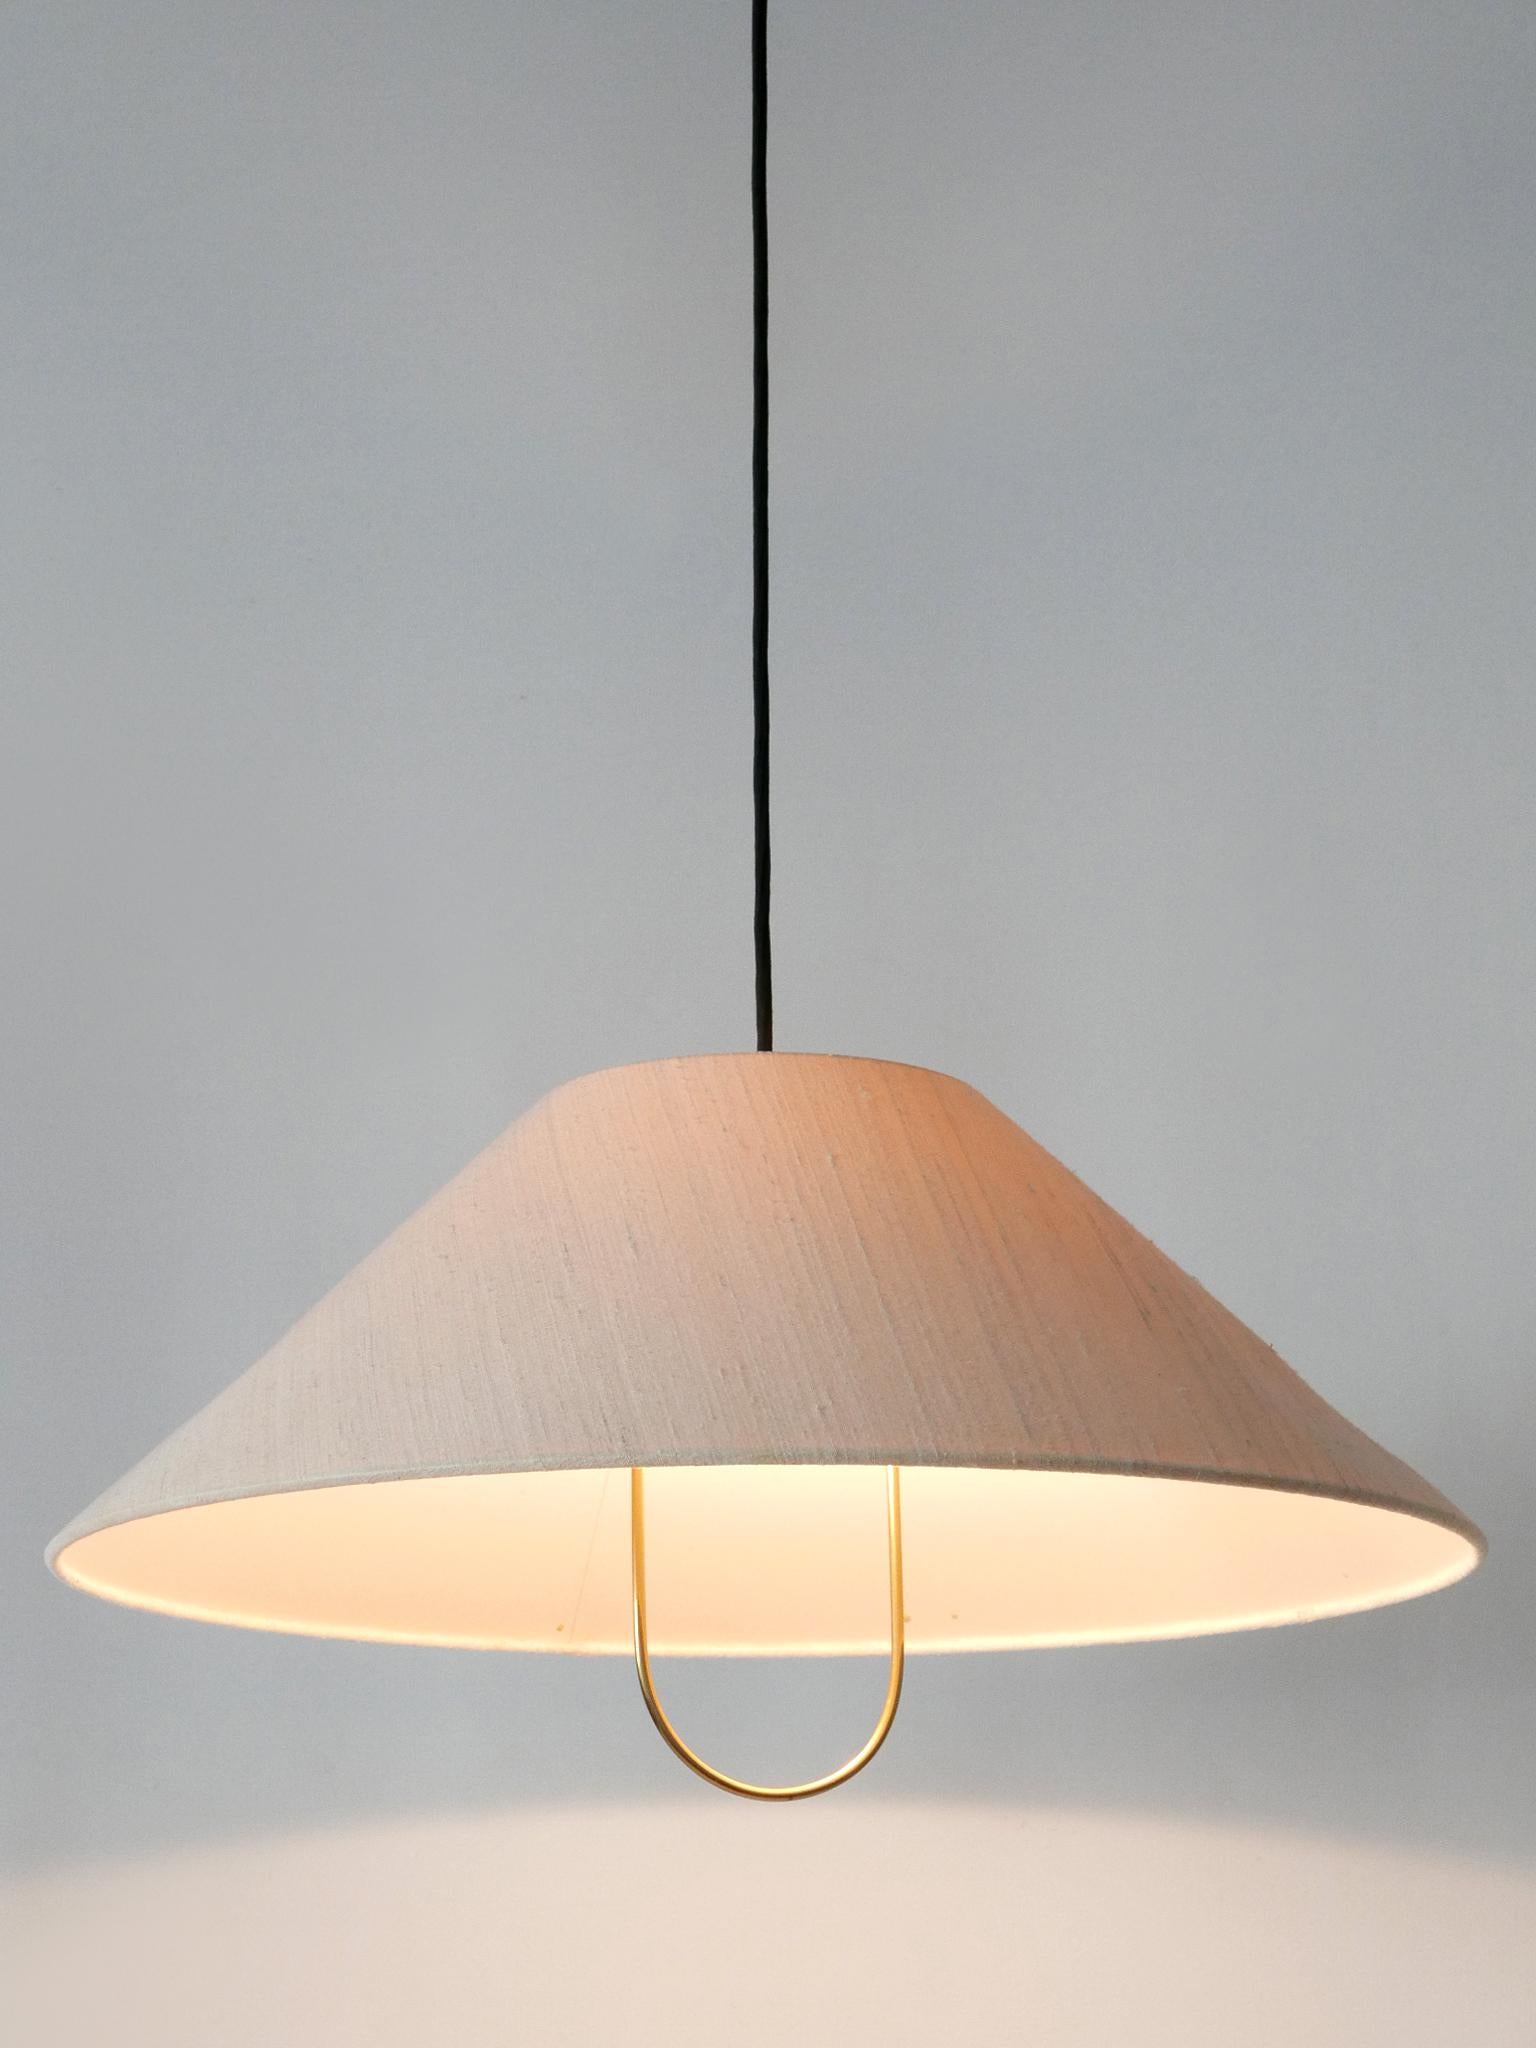 Rare & Early Counterweight Pendant Lamp by Florian Schulz Germany, 1960s 1